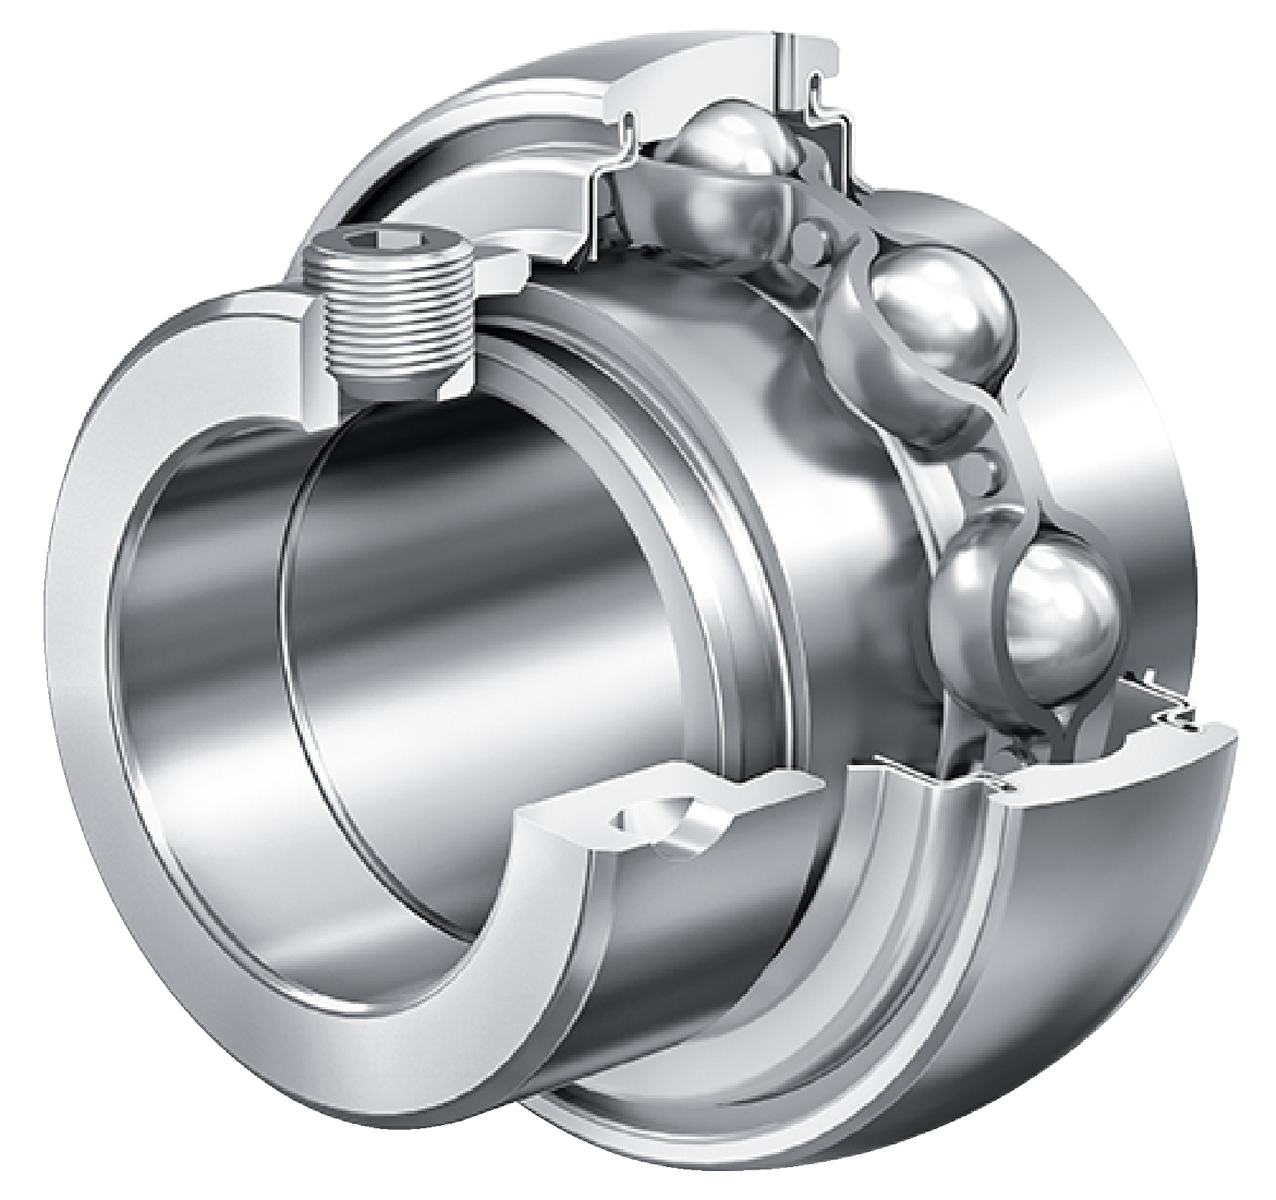 Radial Insert Ball Bearing GE..-XL-KRR-B-FA101, Spherical Outer Ring, Eccentric Locking Collar, R Seals on Both Sides, High and Low Temperature